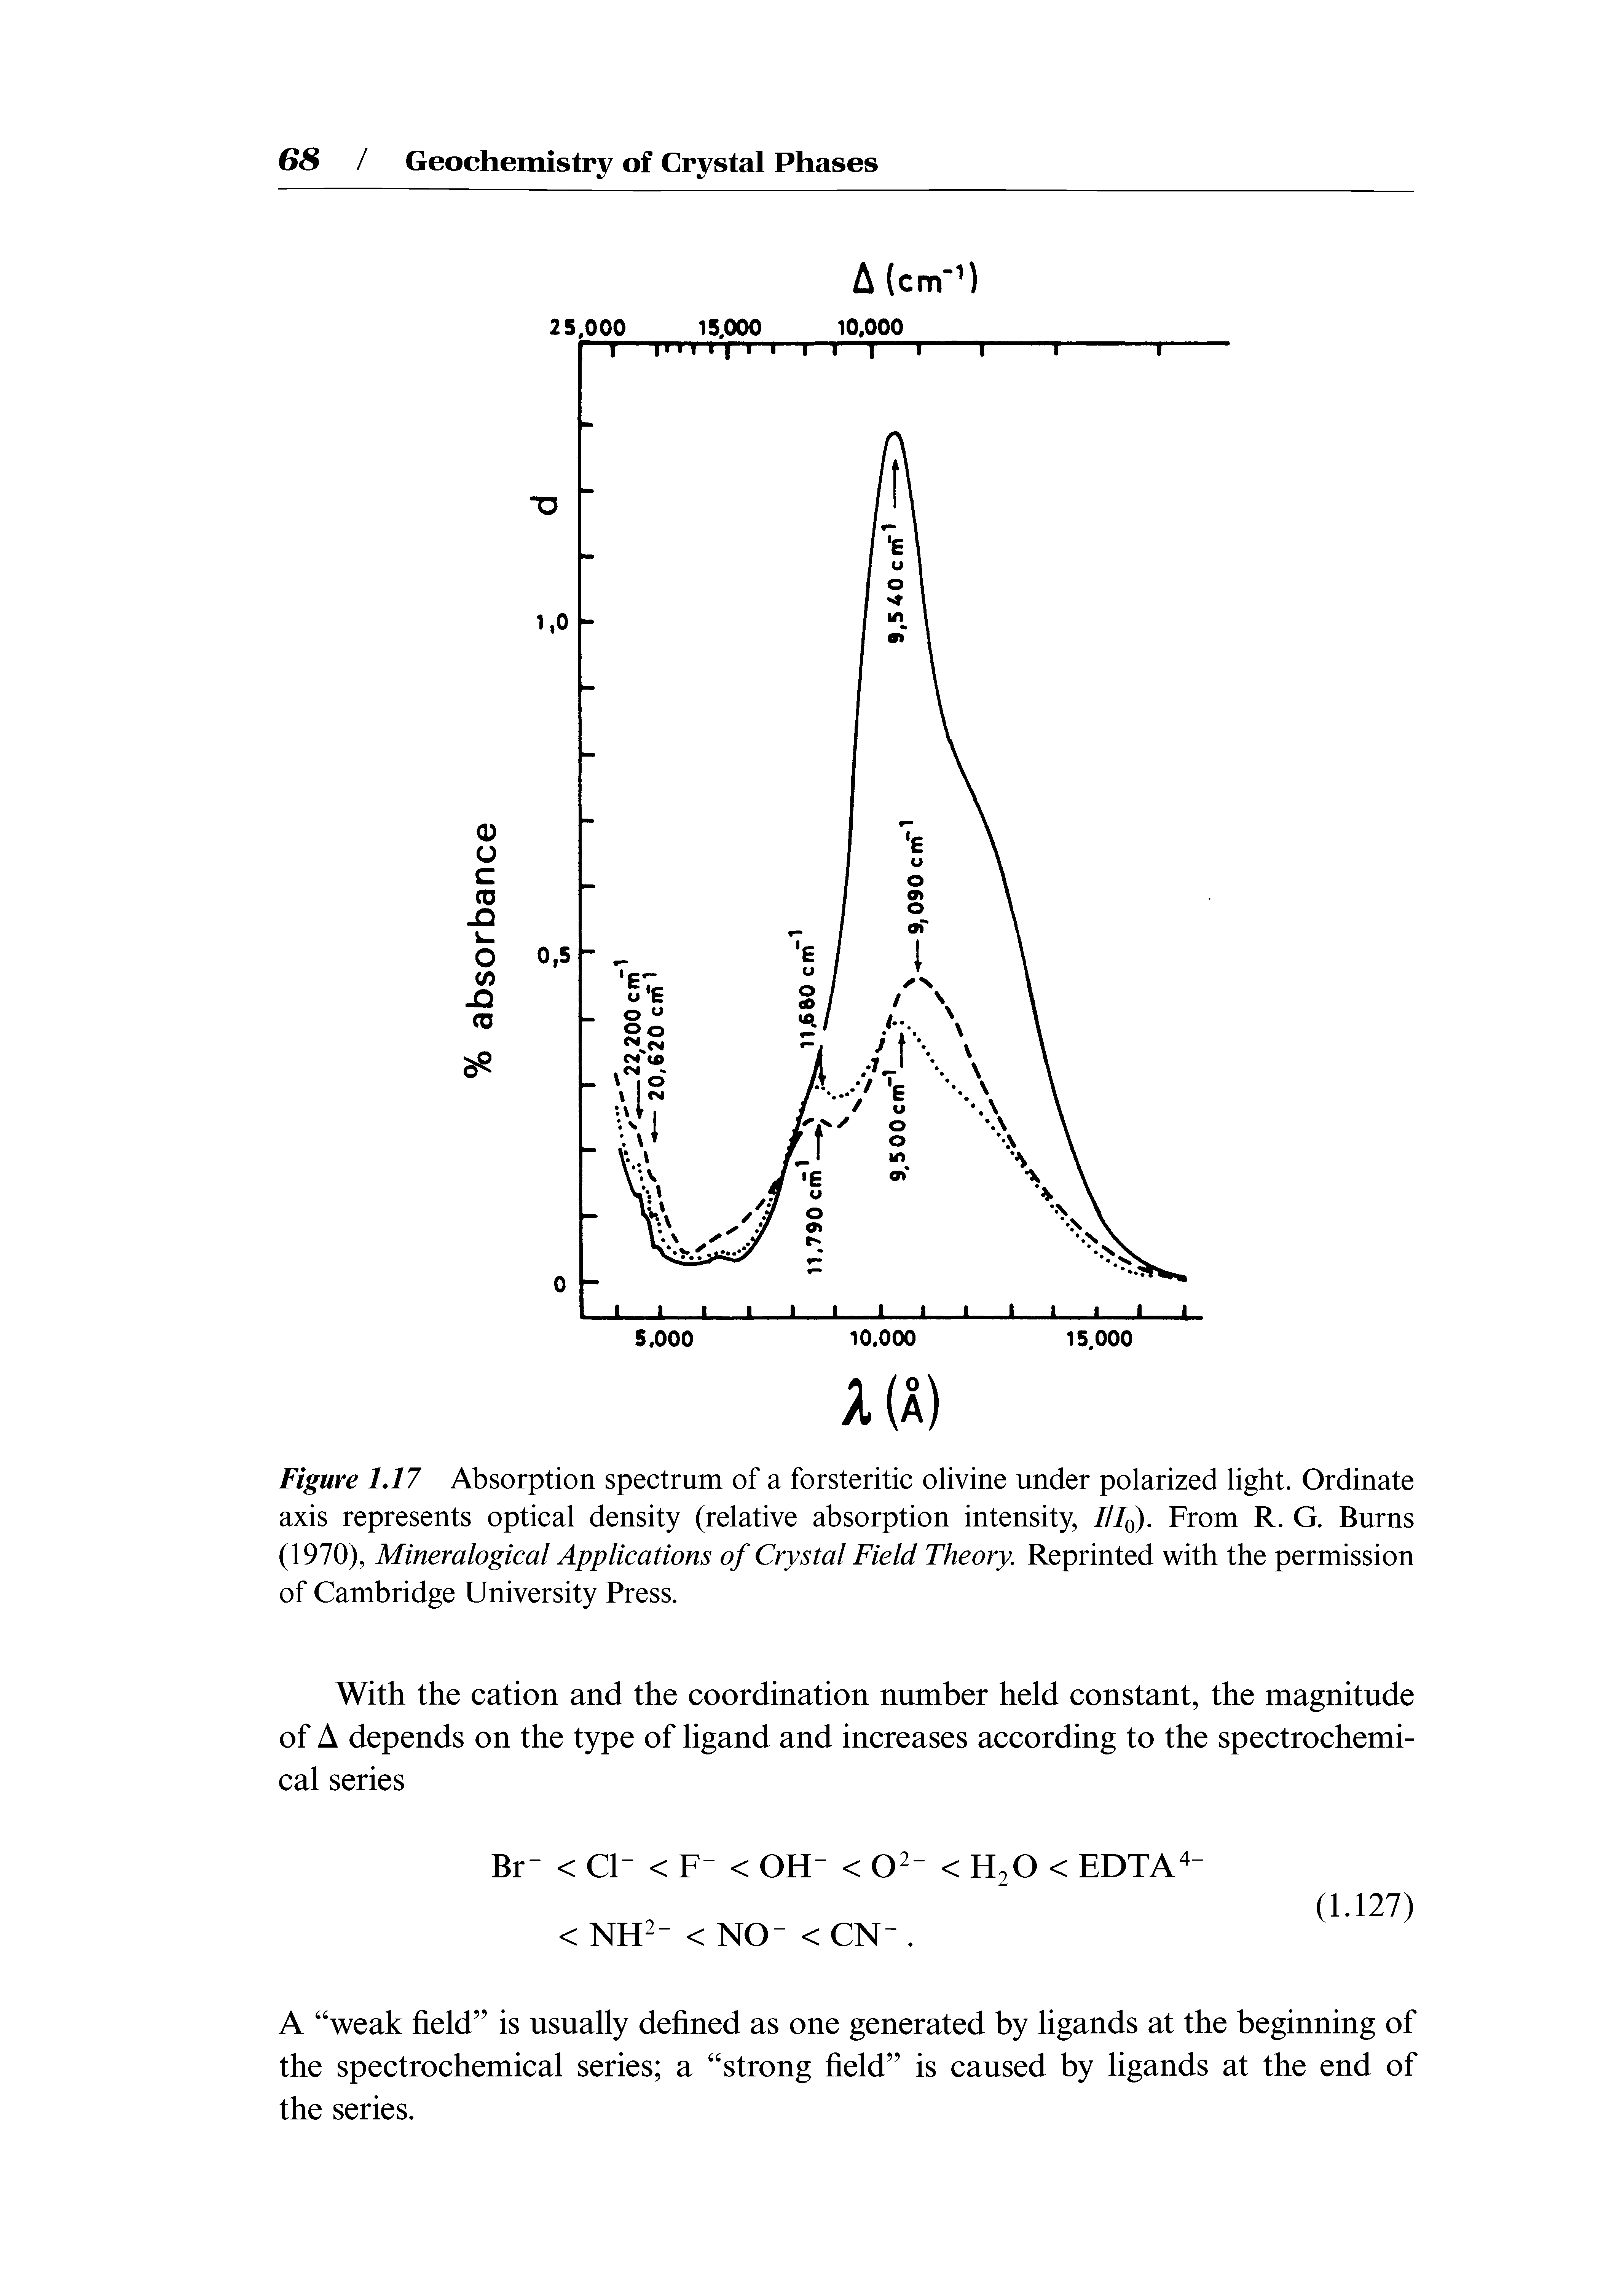 Figure 1,17 Absorption spectrum of a forsteritic olivine under polarized light. Ordinate axis represents optical density (relative absorption intensity, ///q). From R. G. Burns (1970), Mineralogical Applications of Crystal Field Theory. Reprinted with the permission of Cambridge University Press.